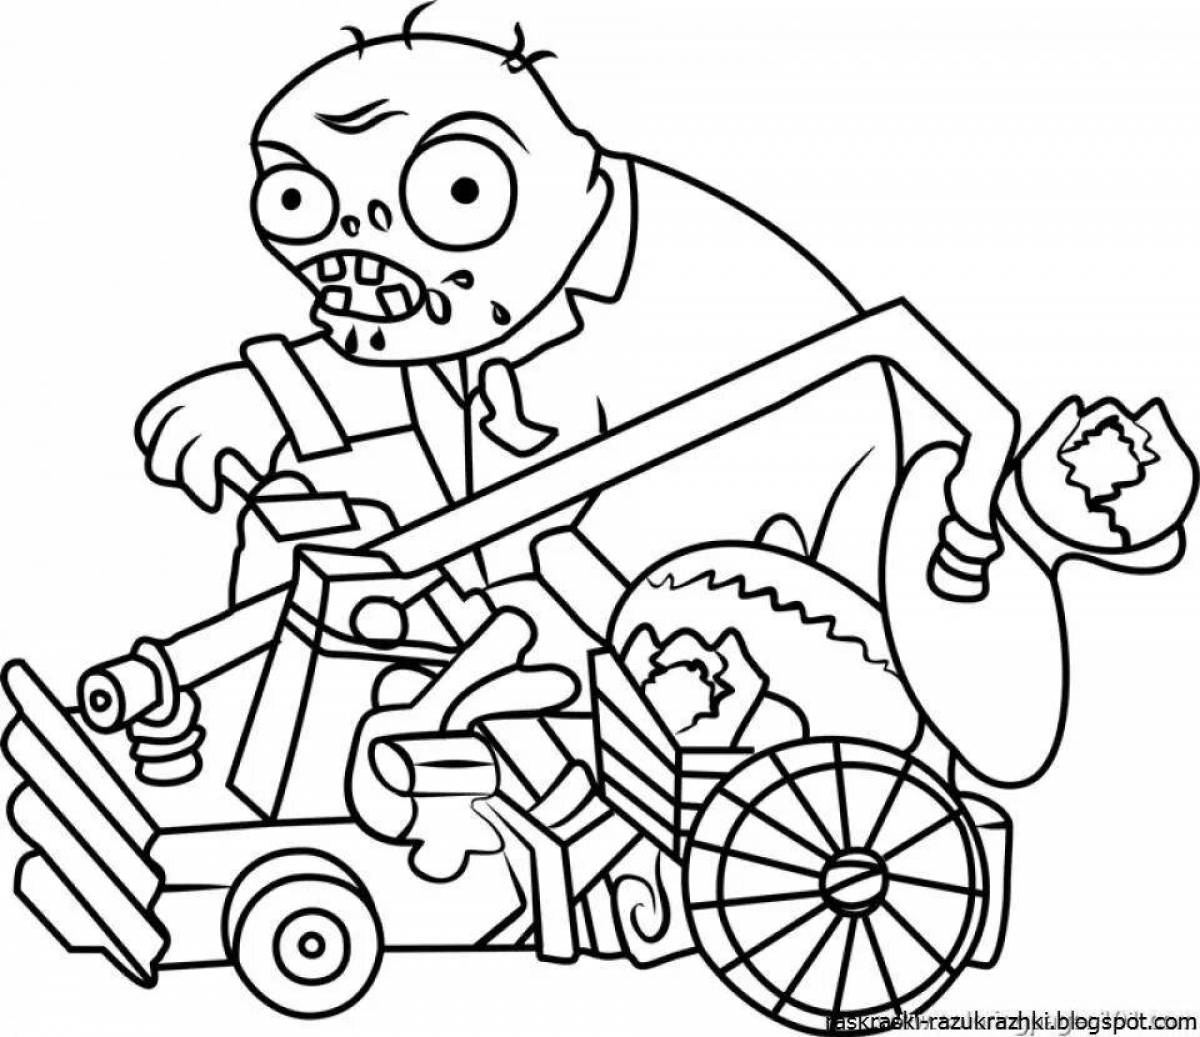 Chilling zombie coloring pages for kids